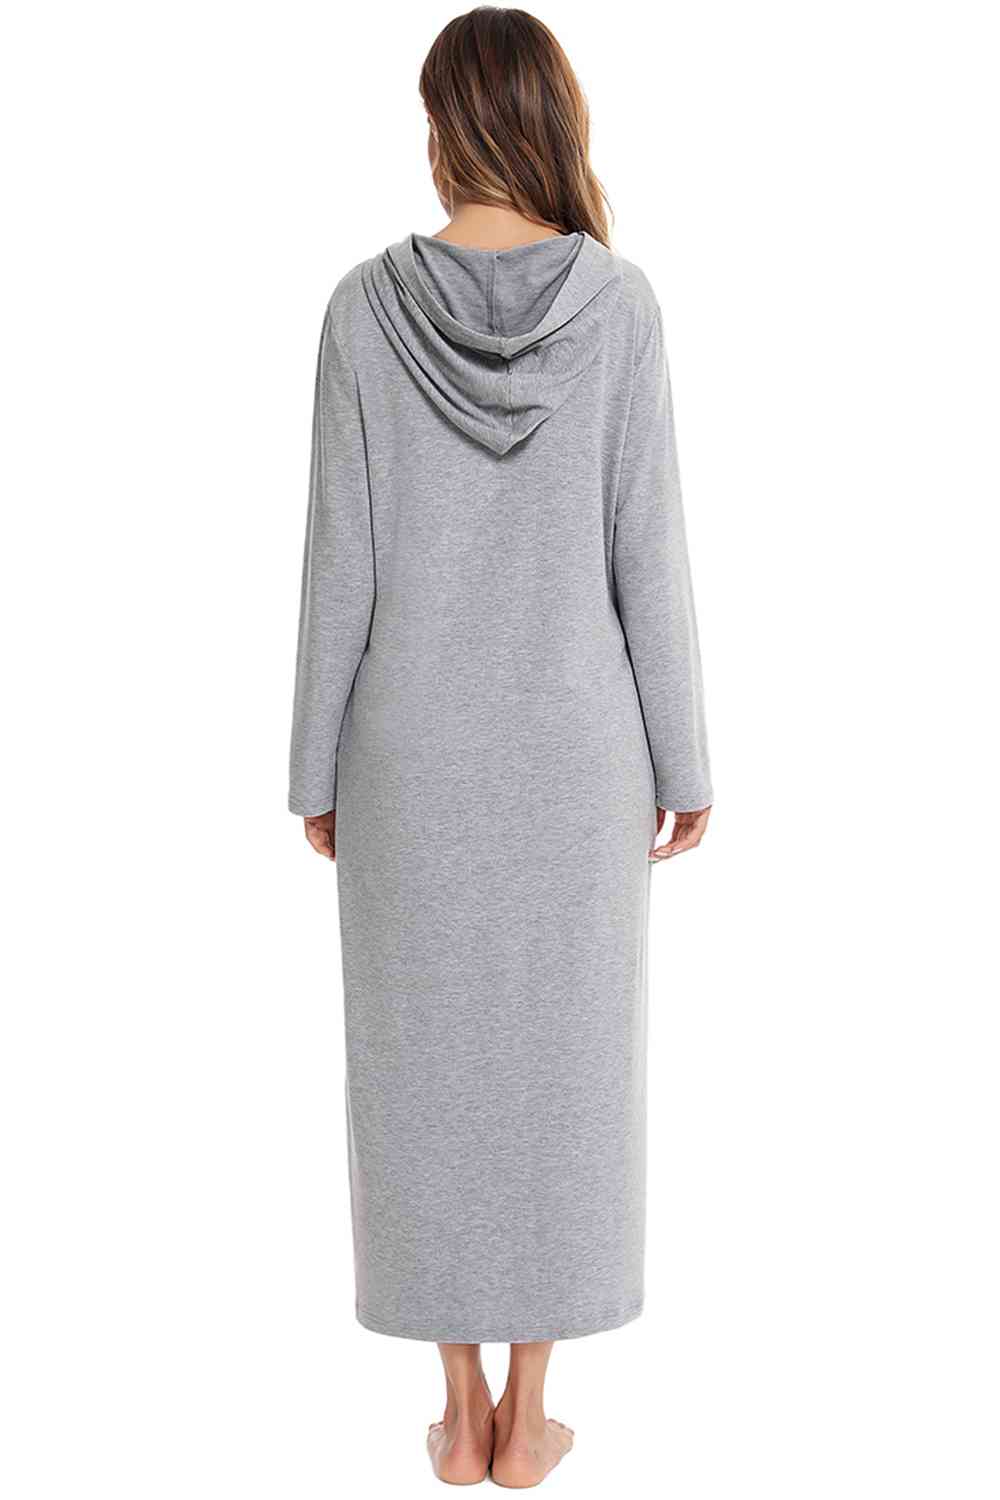 Zip Front Hooded Night Dress with Pockets - Opulence & Essence